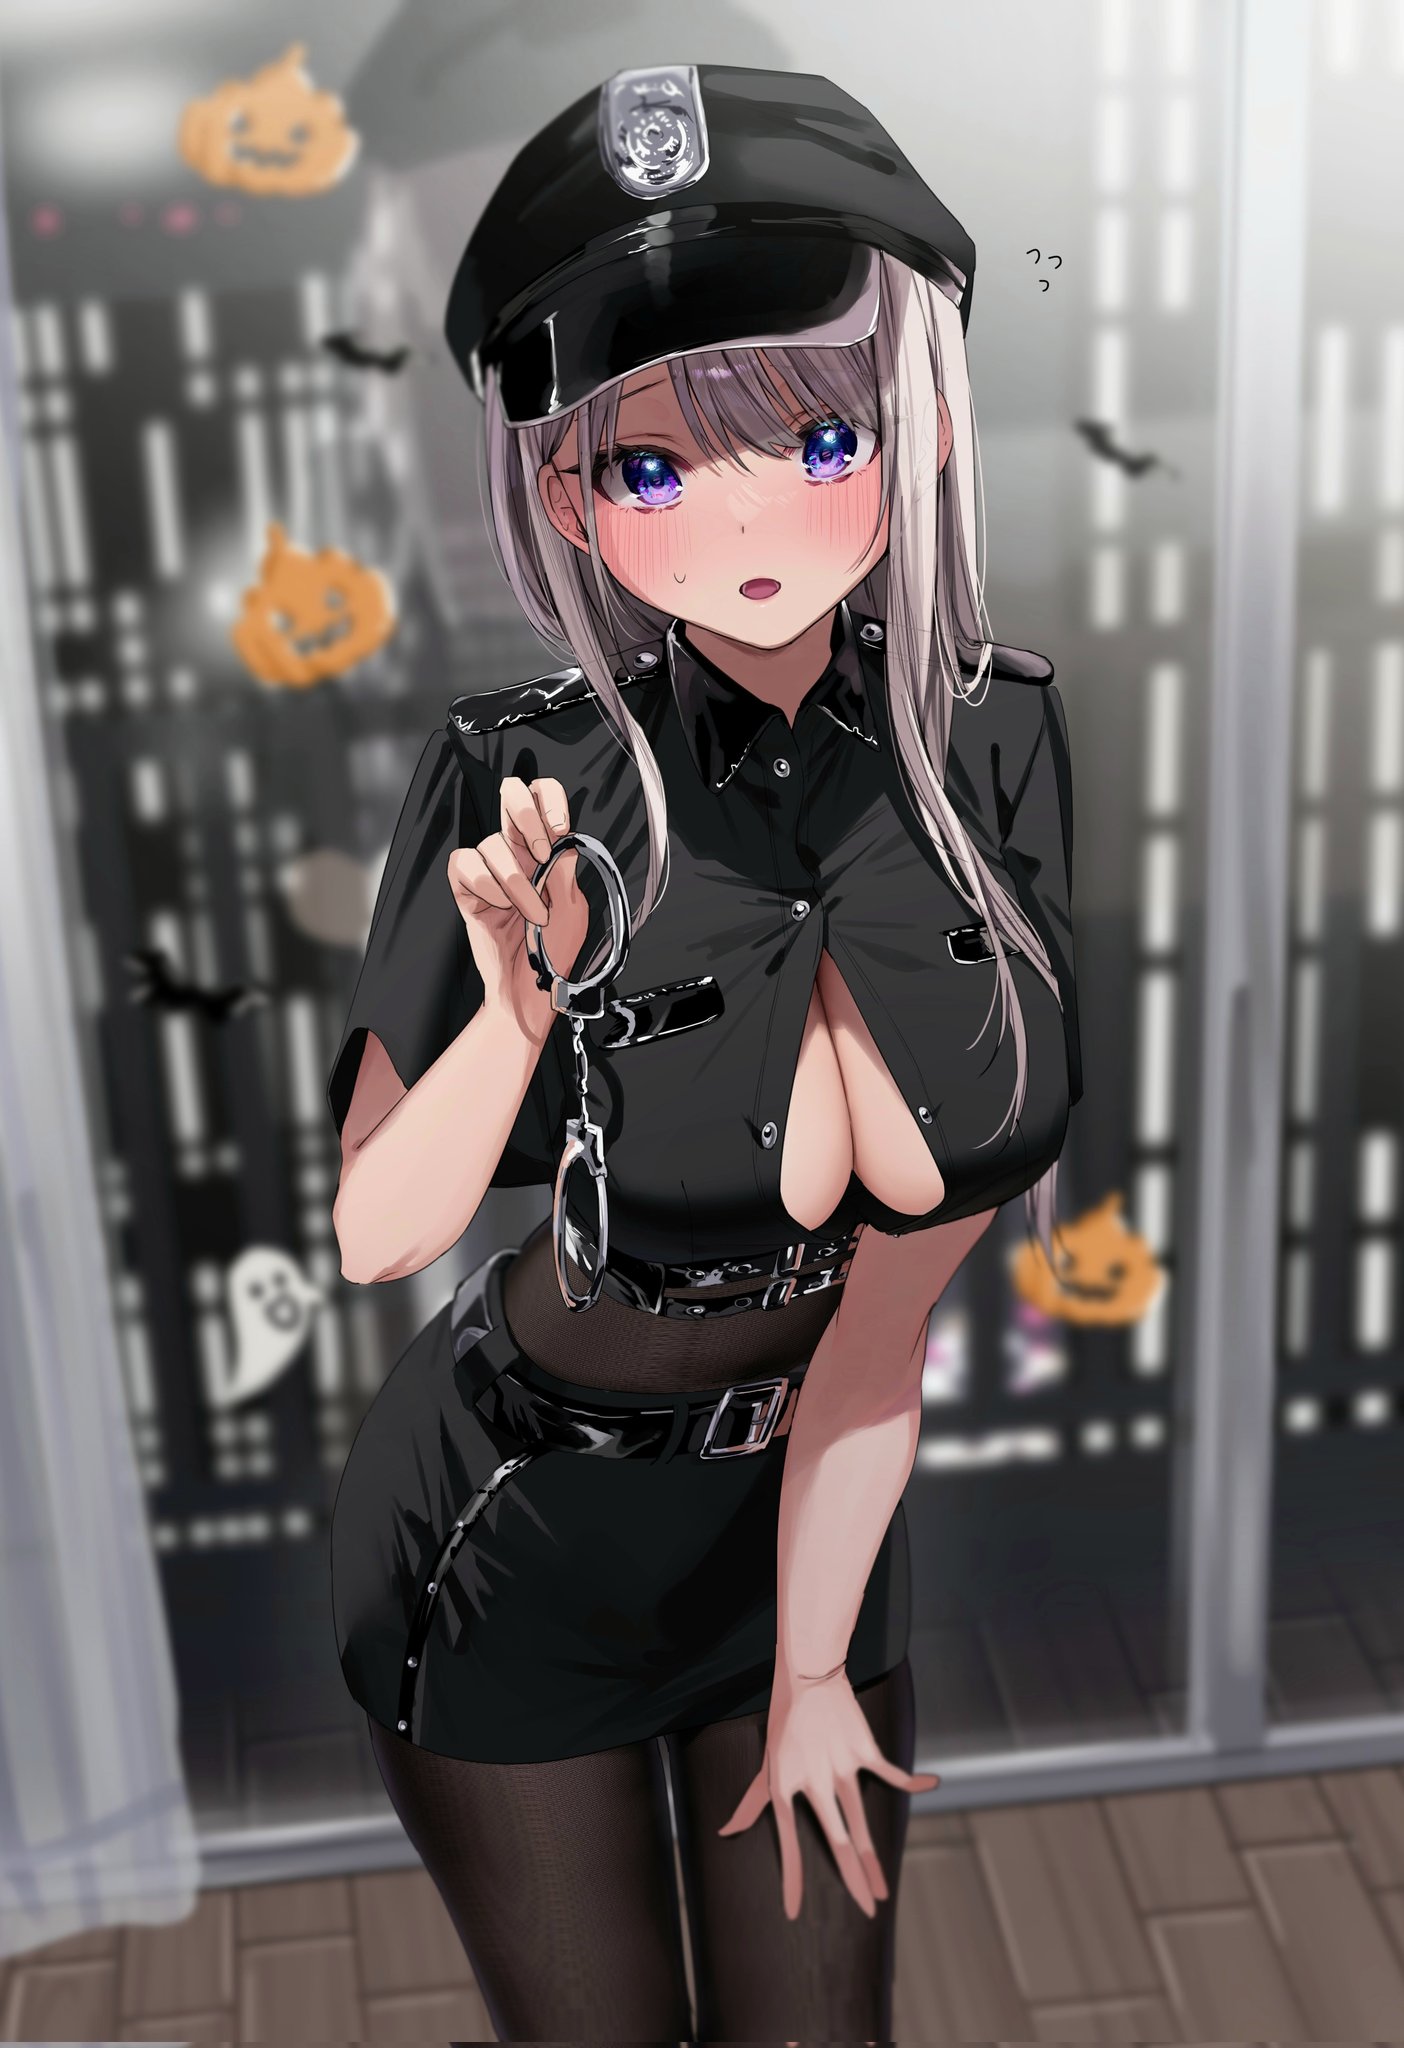 Anime 1404x2048 anime police costume cleavage hat purple eyes big boobs handcuffs stickers